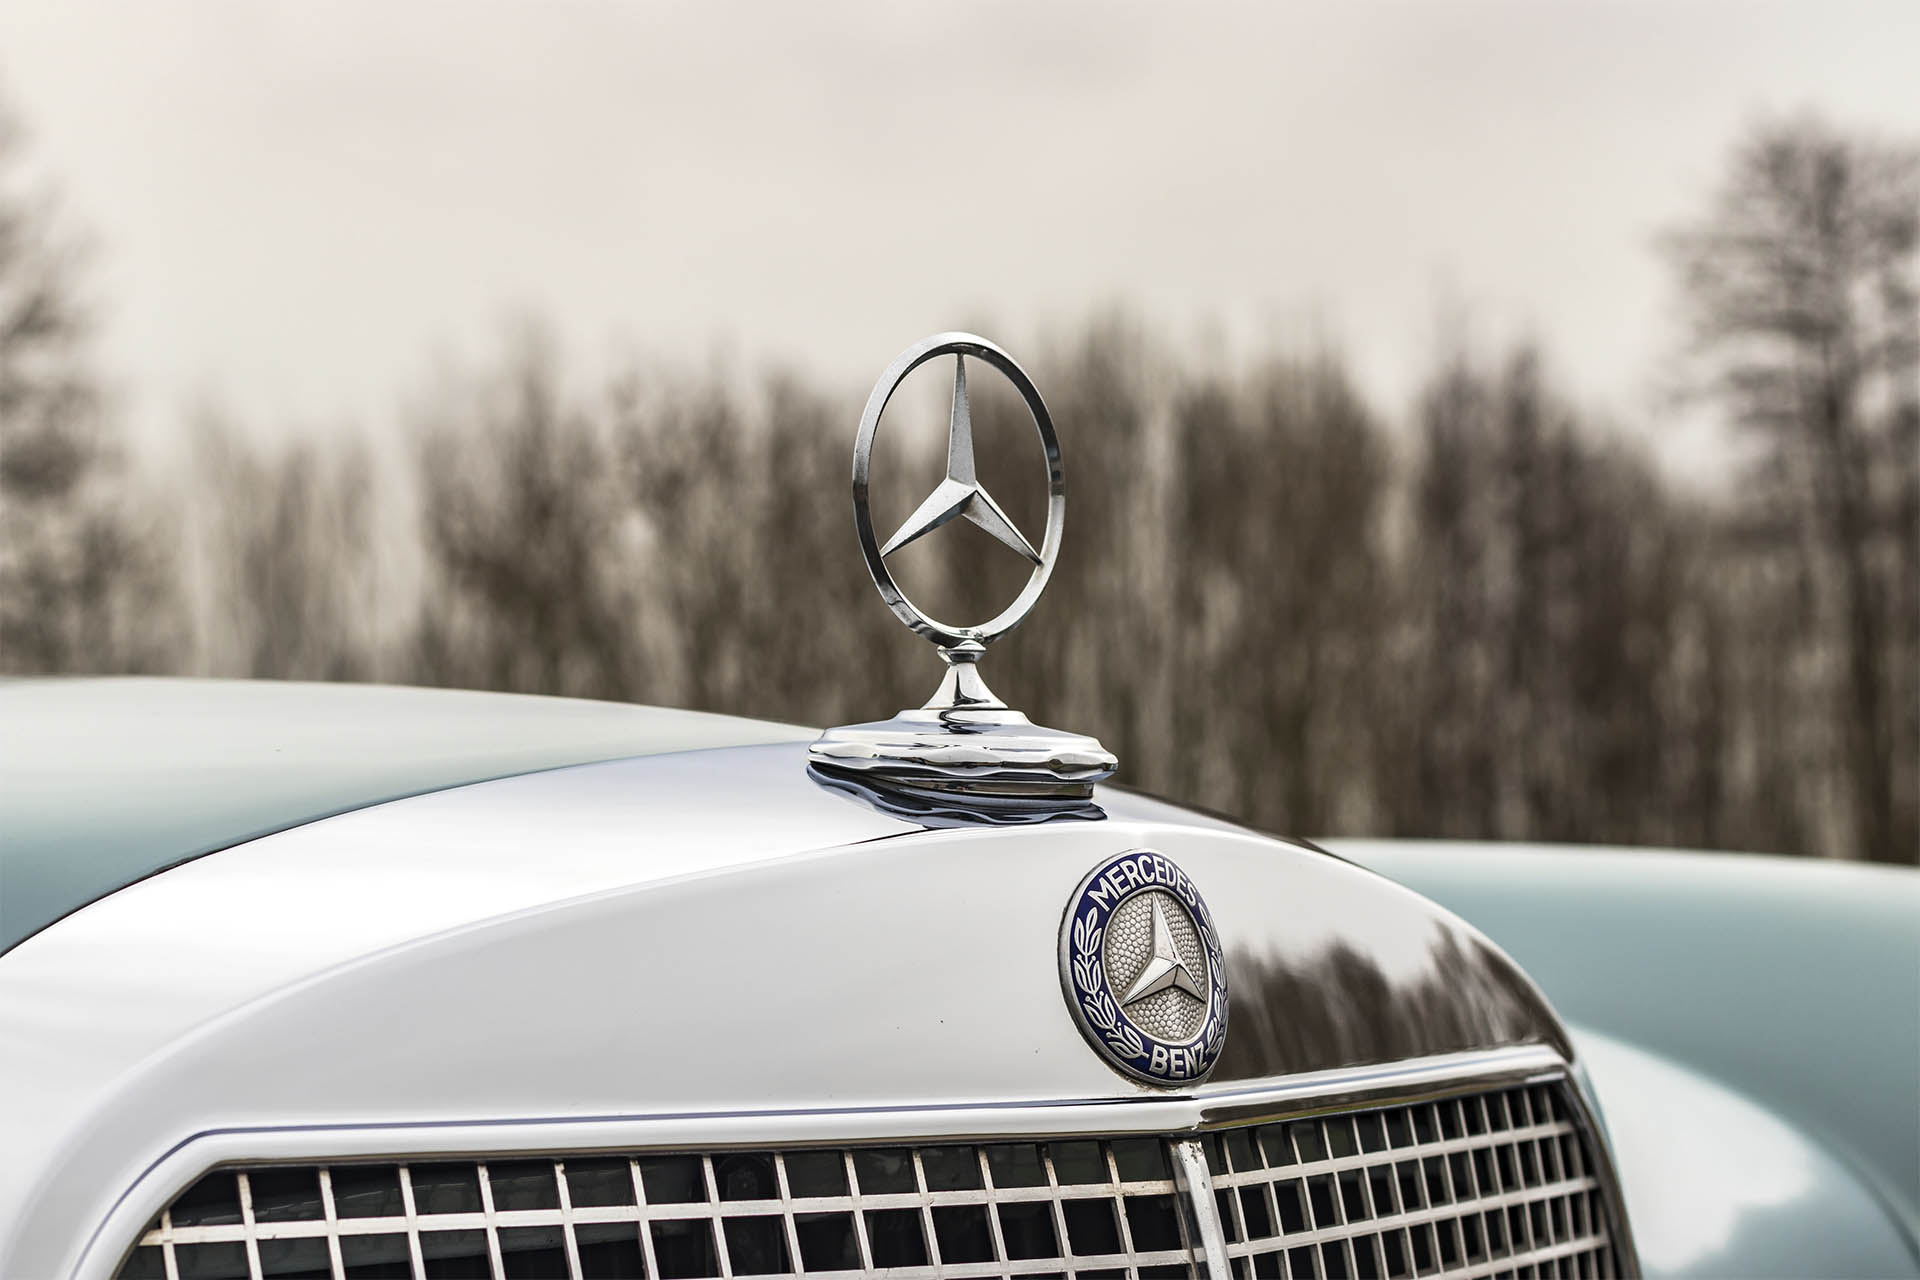 Real Art On Wheels | 1968 Mercedes-Benz 280 SE Coupe